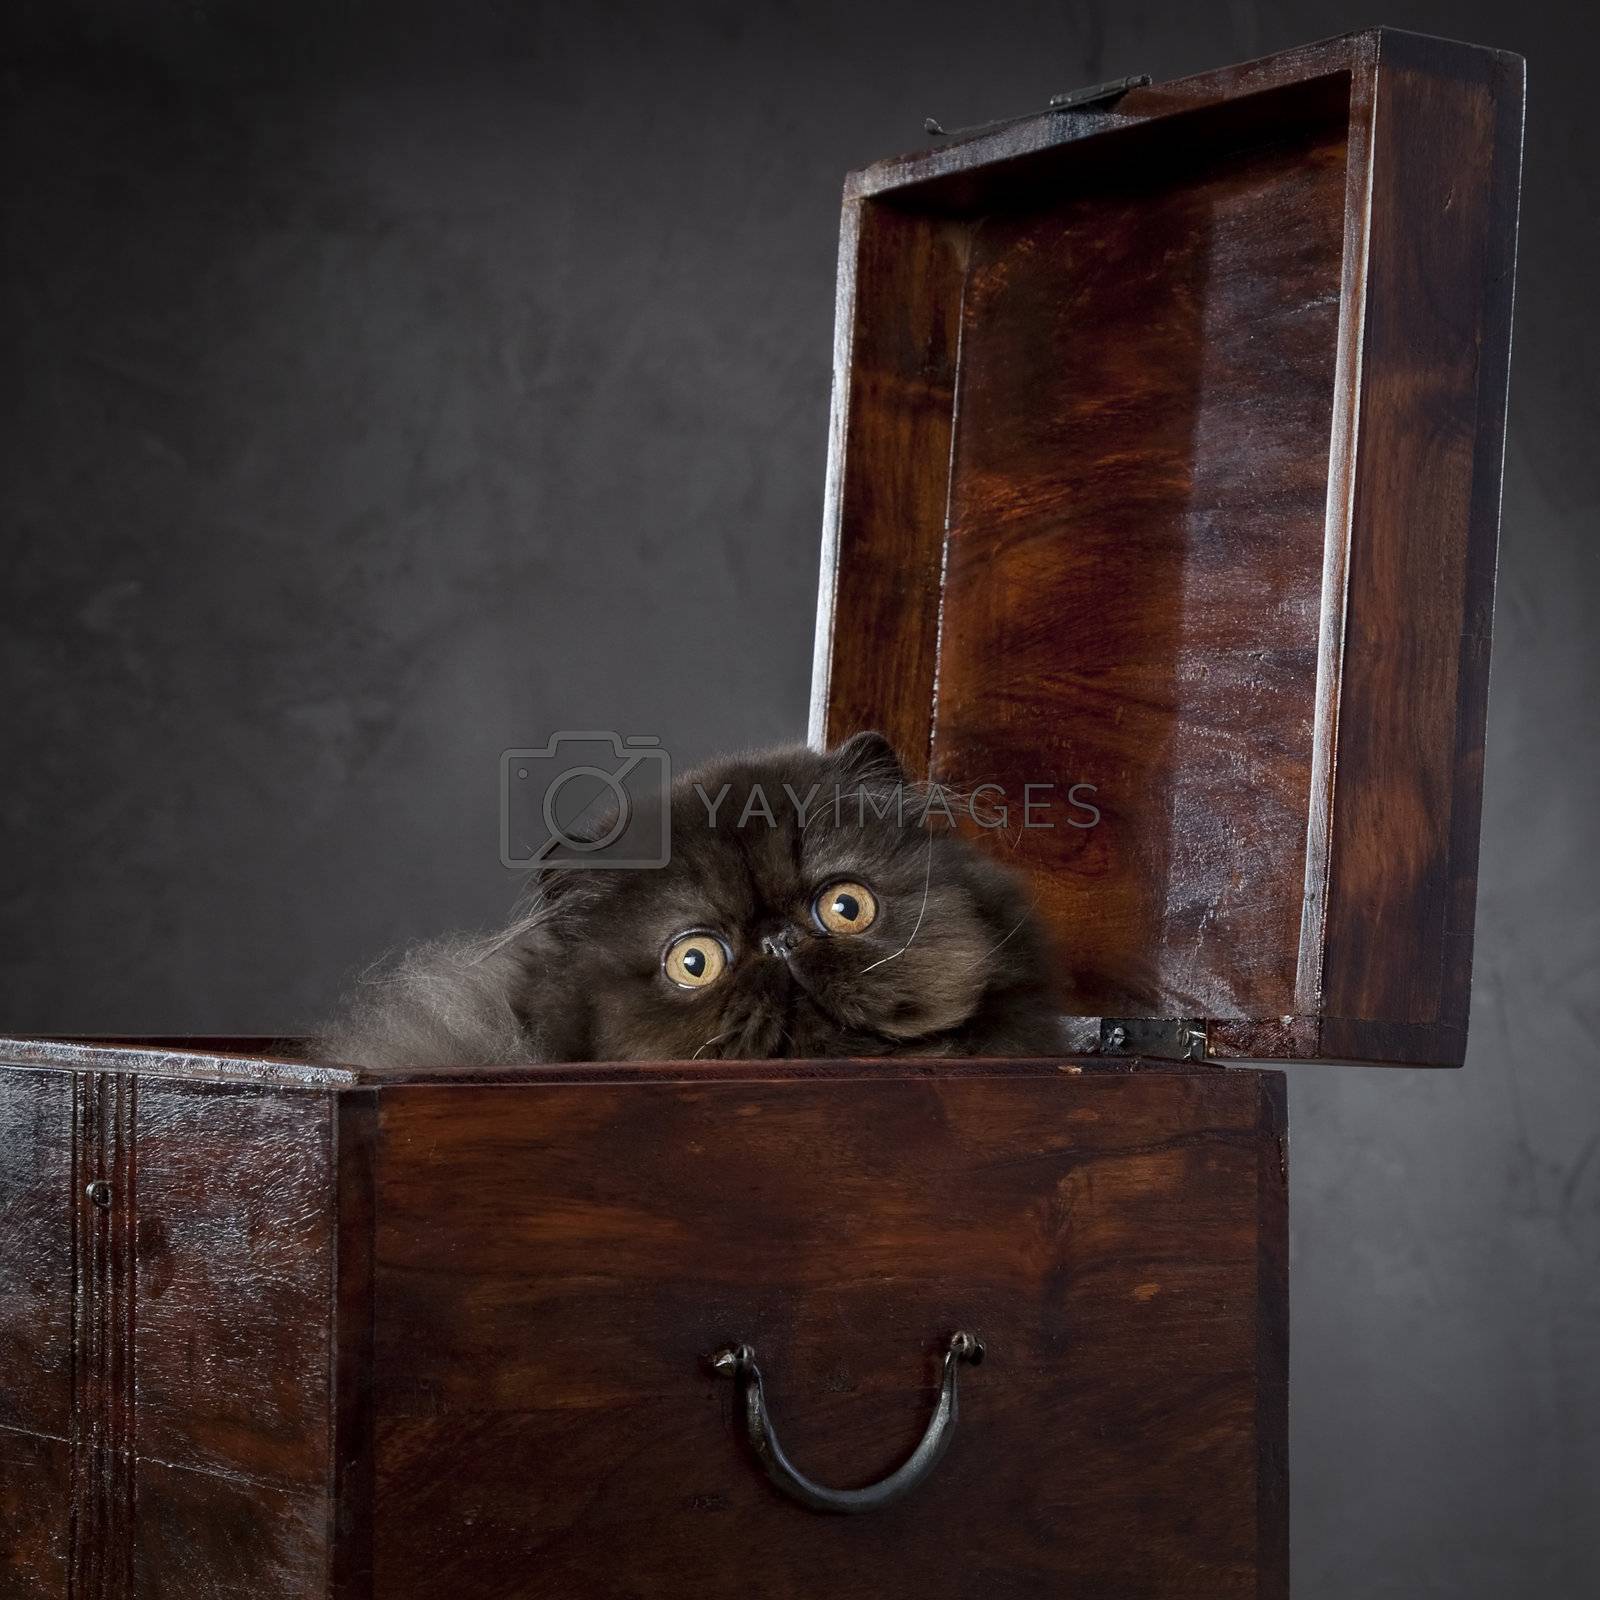 Royalty free image of Long haired persian cat in the wooden box by mjp